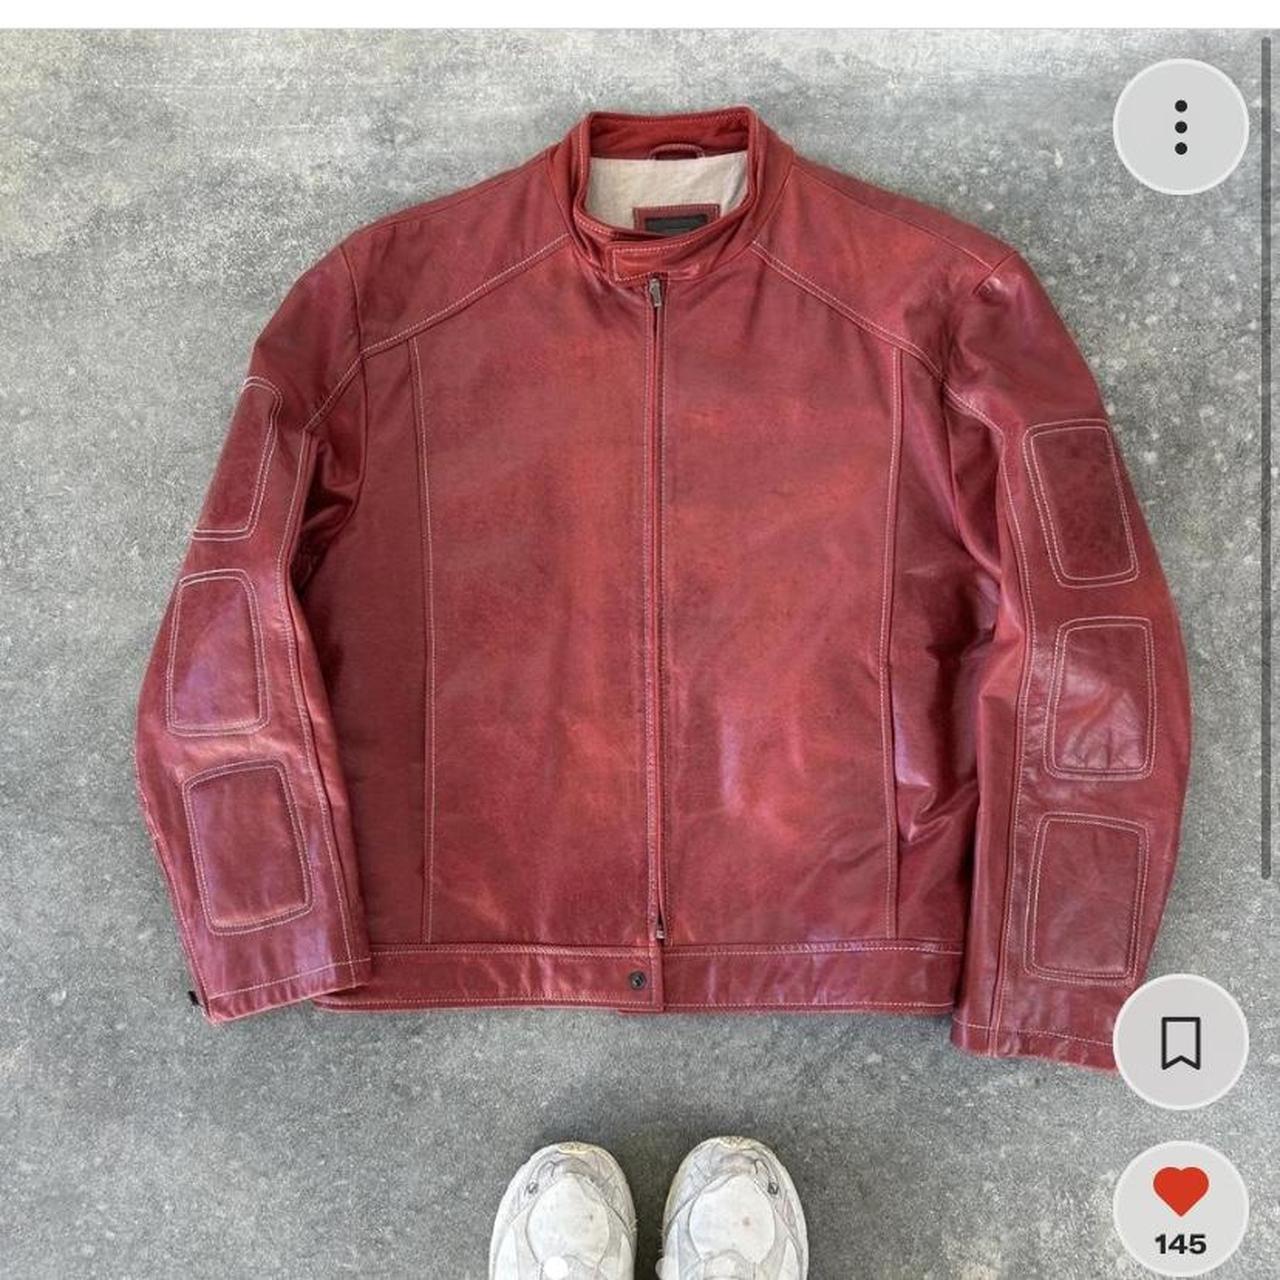 Wilson’s Leather Women's Red Jacket